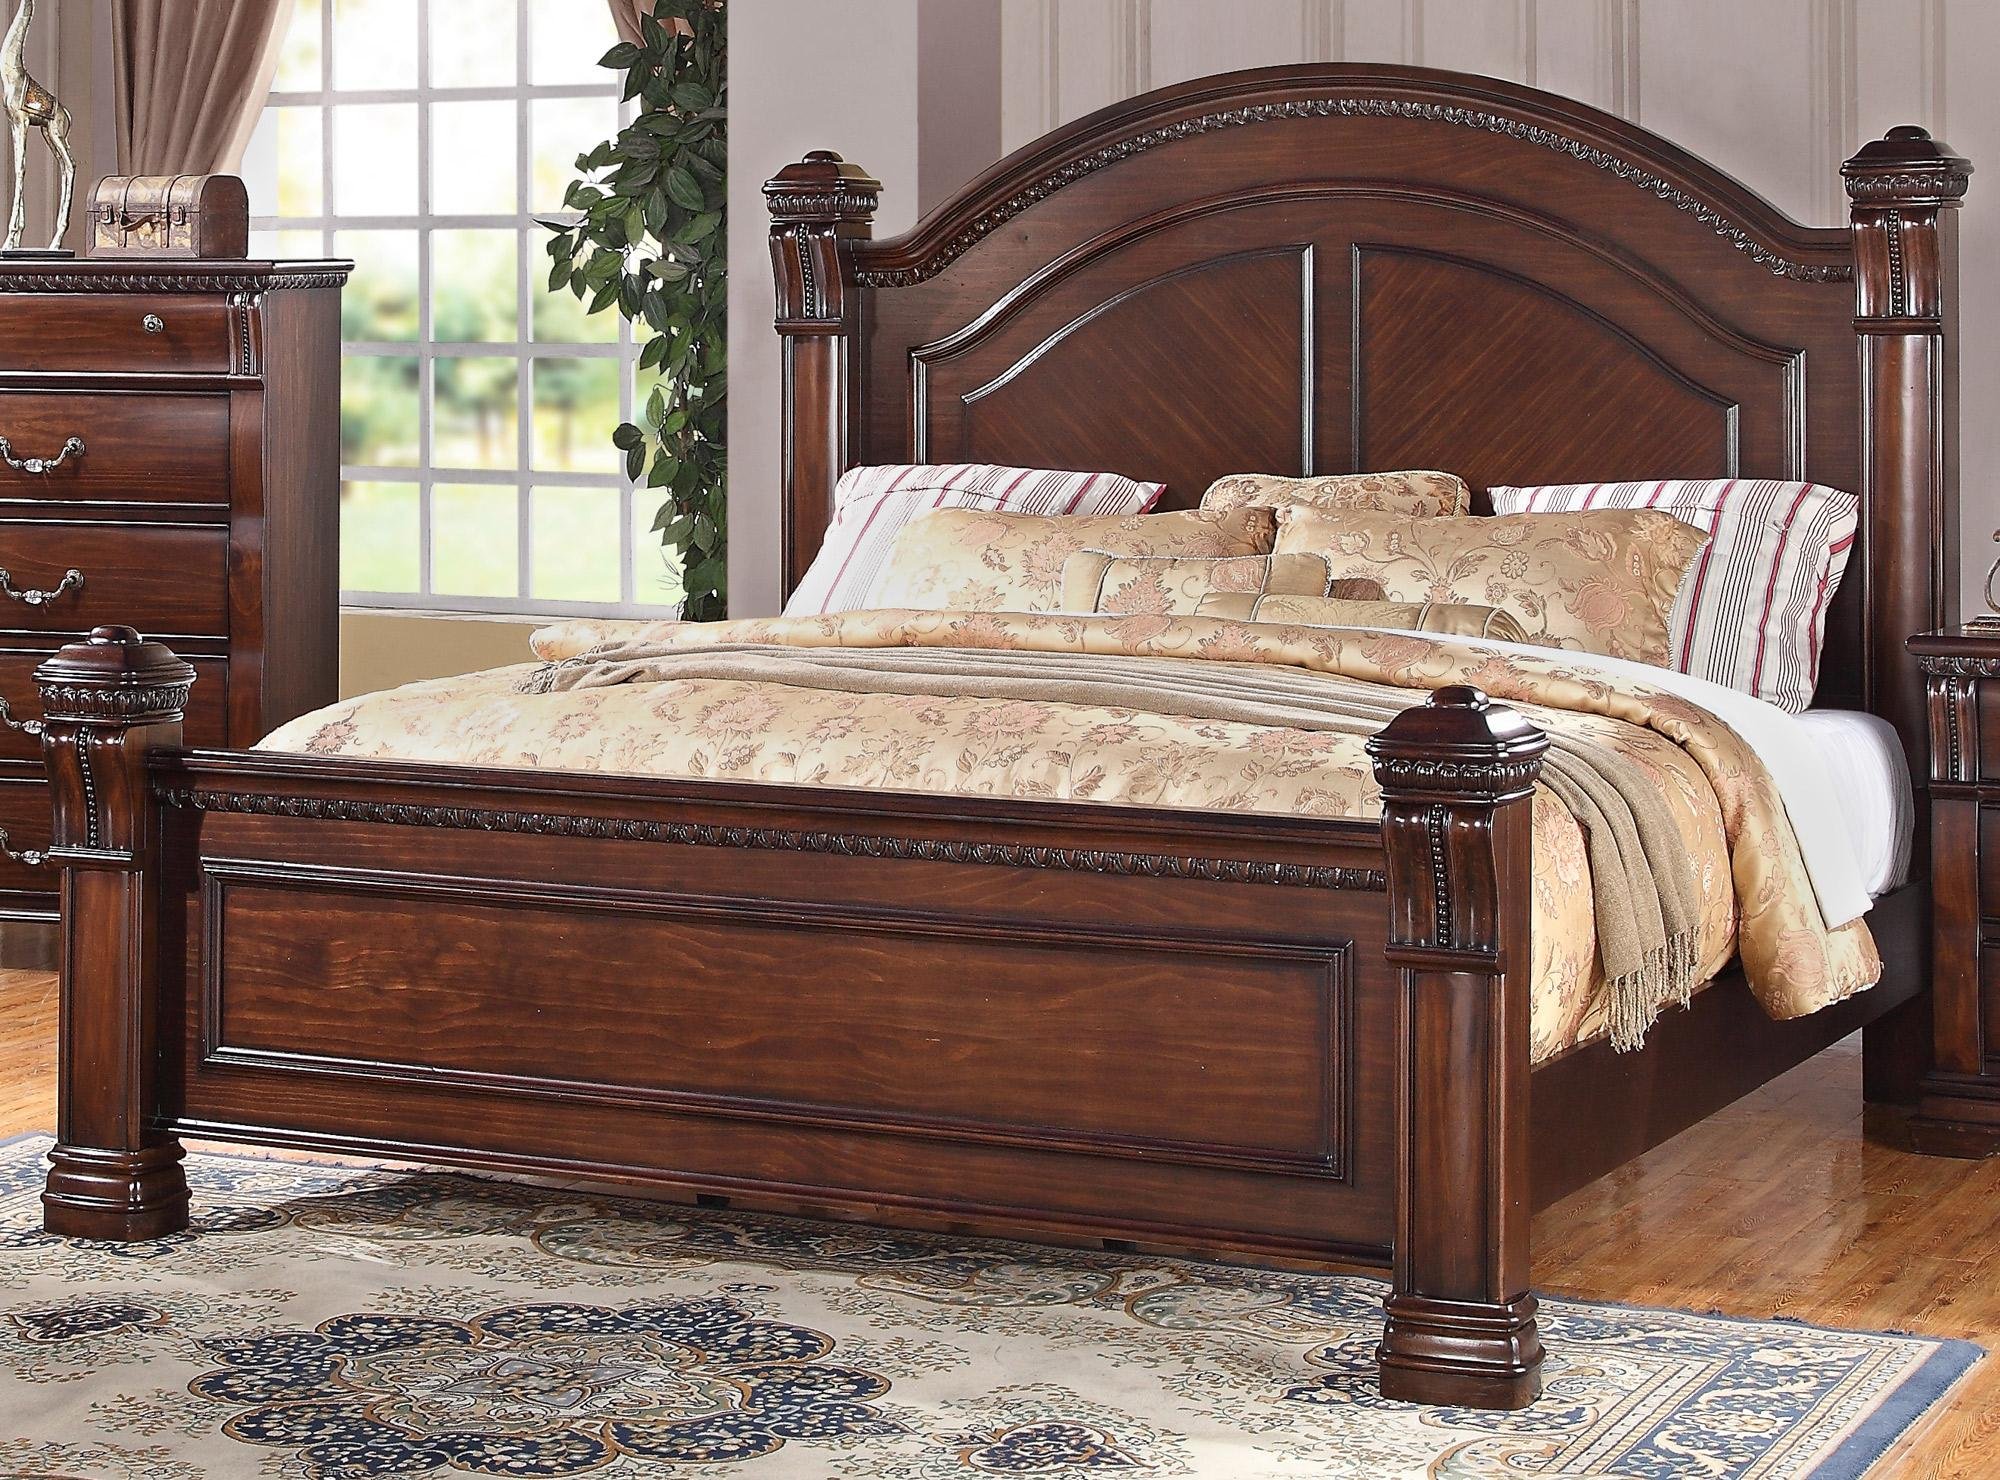 isabella bedroom furniture collection